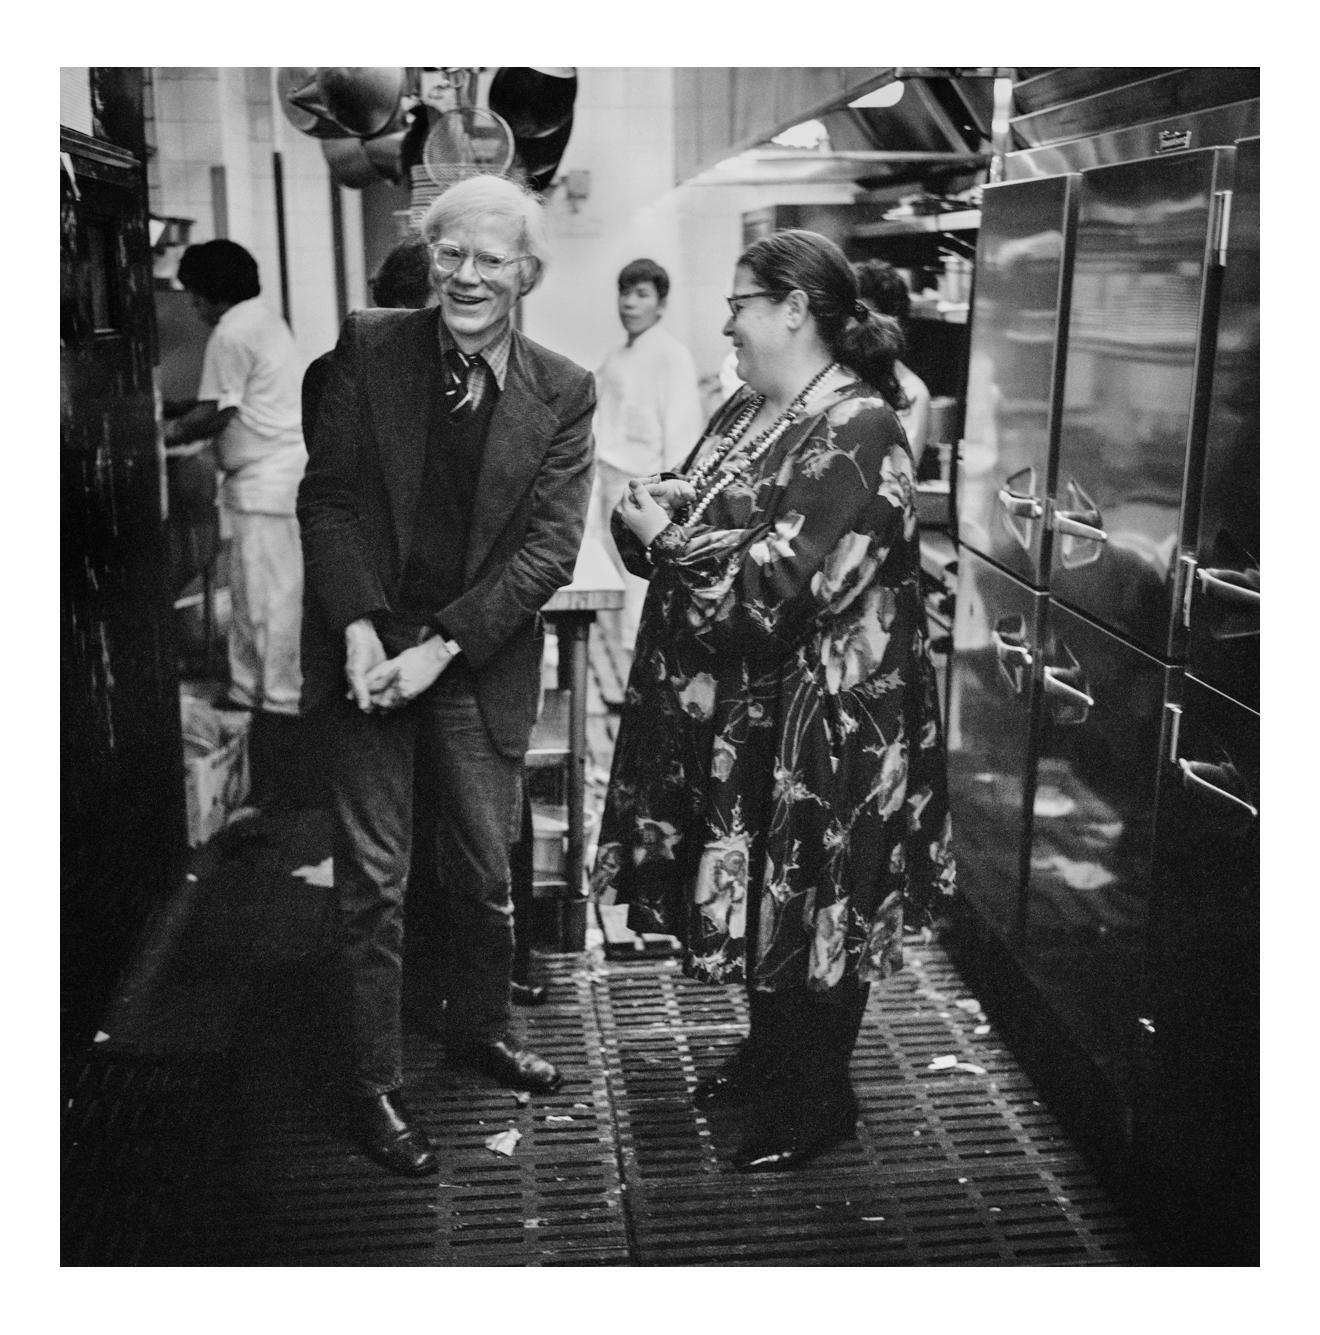 Elaine's Kitchen - Andy Warhol and Elaine, New York, 1976